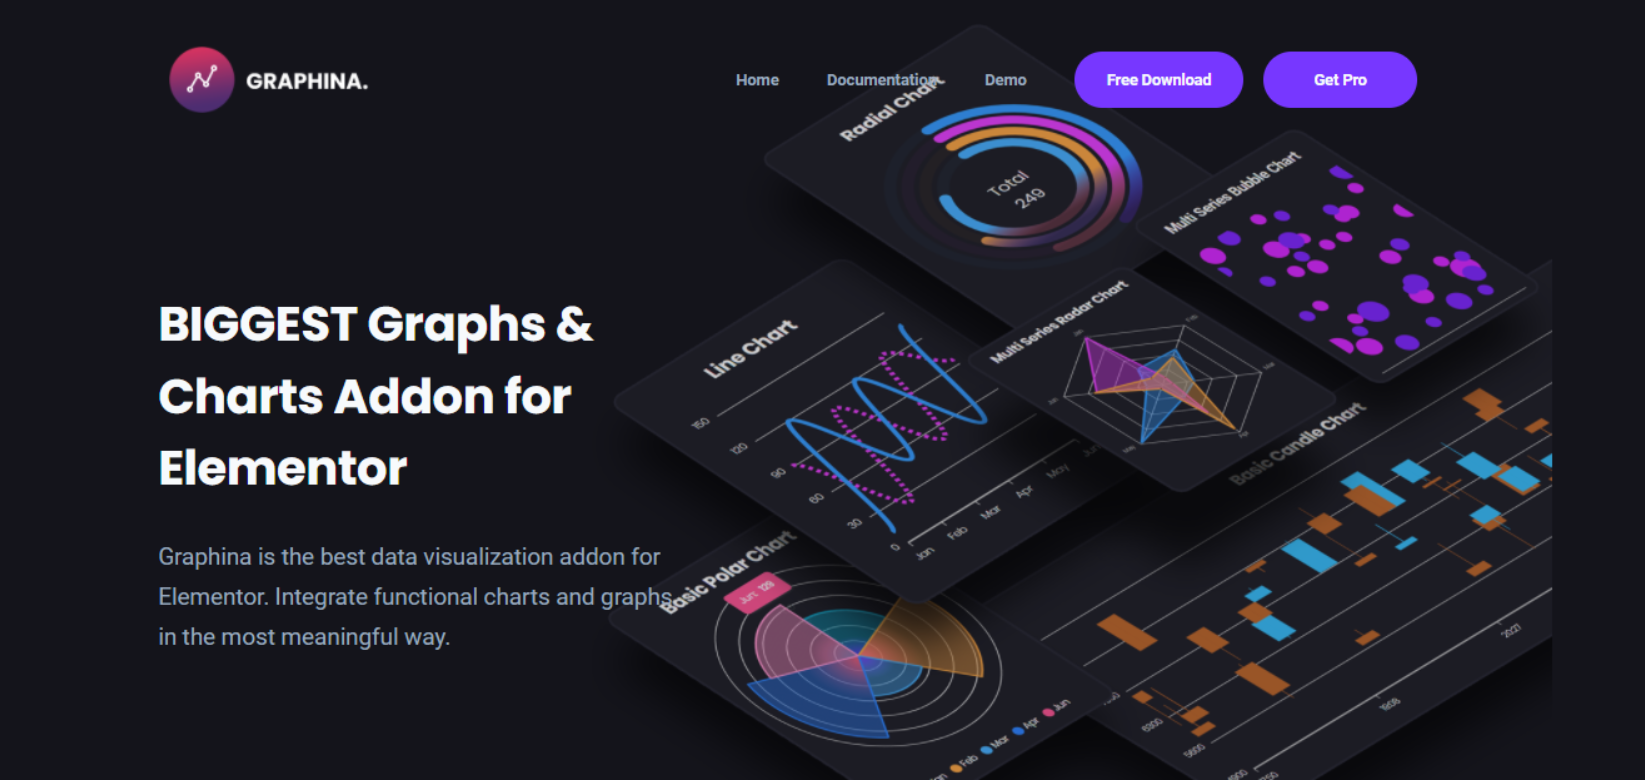 Graphina | Elementor Charts and Graphs | Iqonic Design top 5 ecommerce plugins for wordpress data visualization in 2022 Top 5 Ecommerce Plugins For WordPress Data Visualization In 2022 Graphina 1